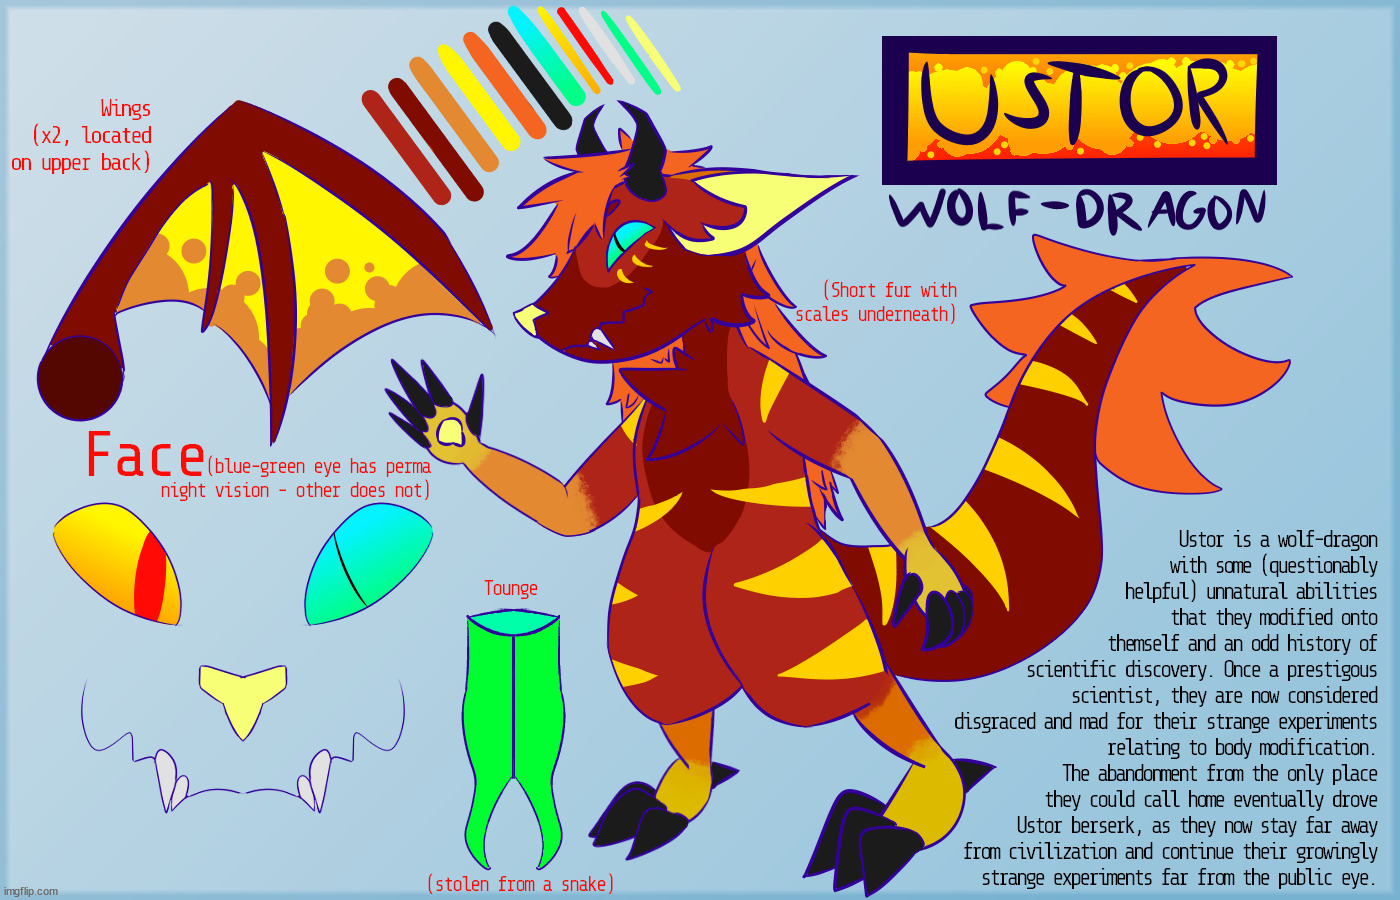 re-designed/re-made an old character of mine, Ustor (my art and character) | image tagged in furry,art,drawings | made w/ Imgflip meme maker